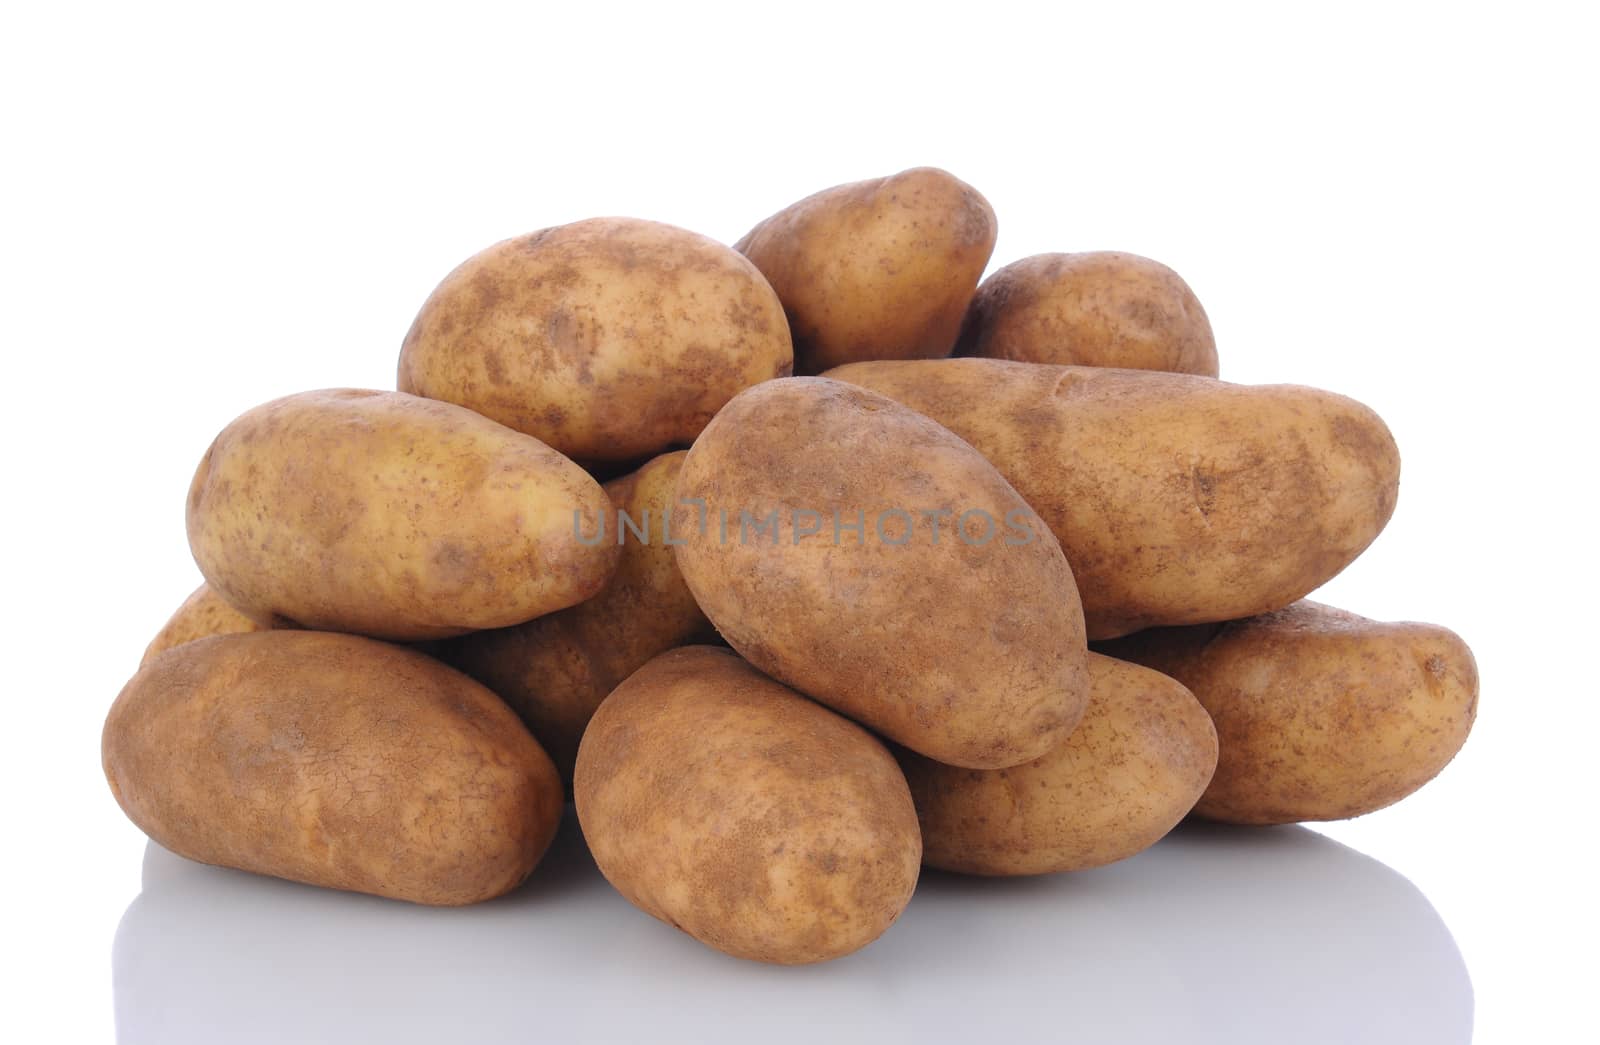 Closeup of a pile of russet potatoes on a white surface with reflection. Horizontal format.